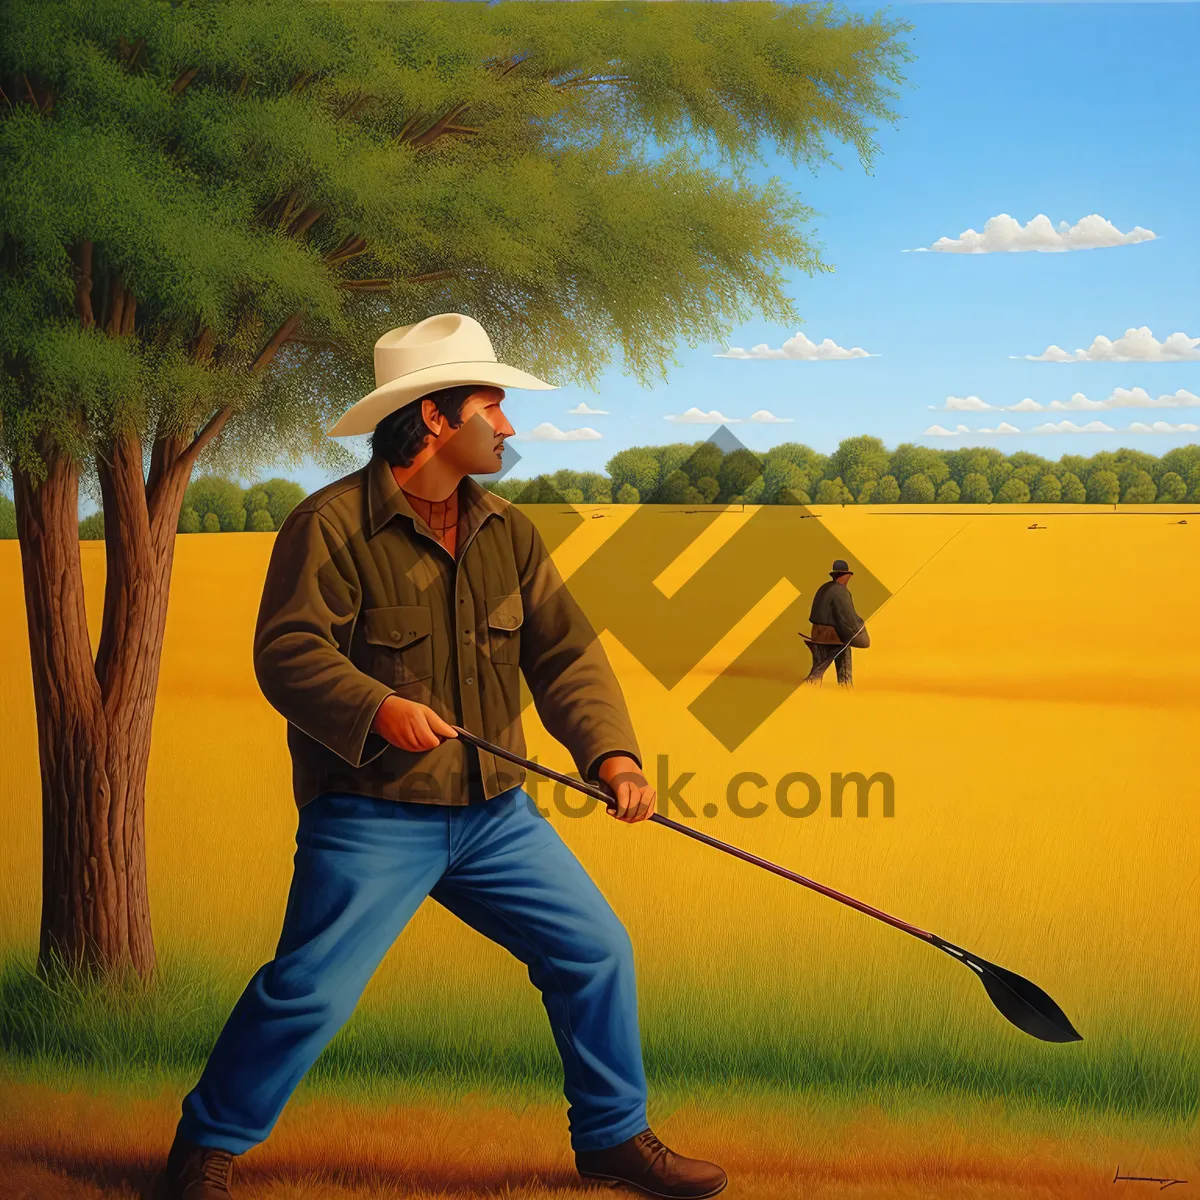 Picture of Man Playing Golf Swing with Iron on Green Fairway